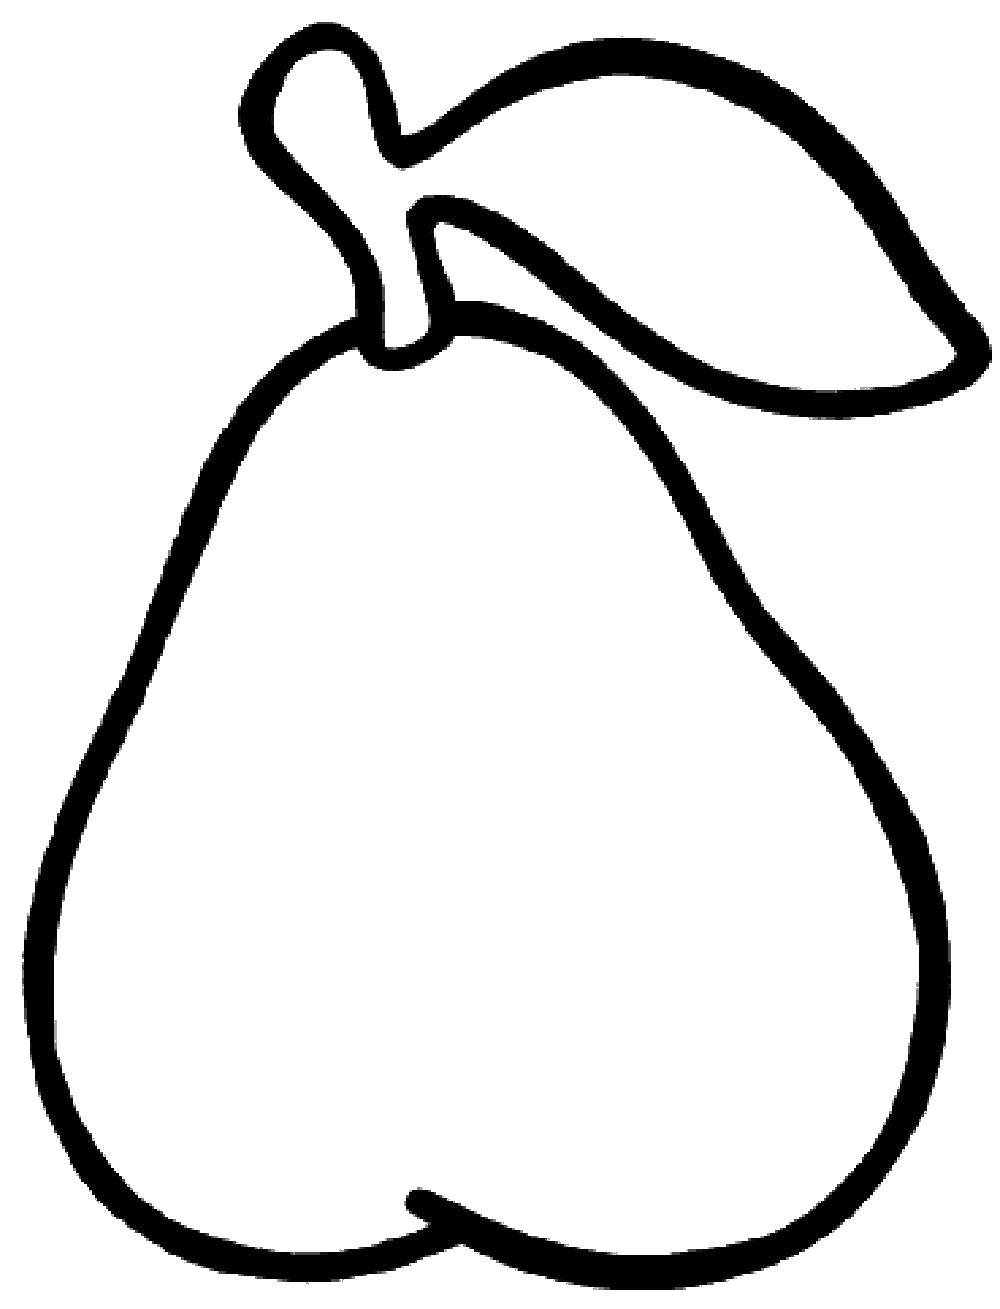 Coloring Pear. Category coloring for little ones. Tags:  pear.